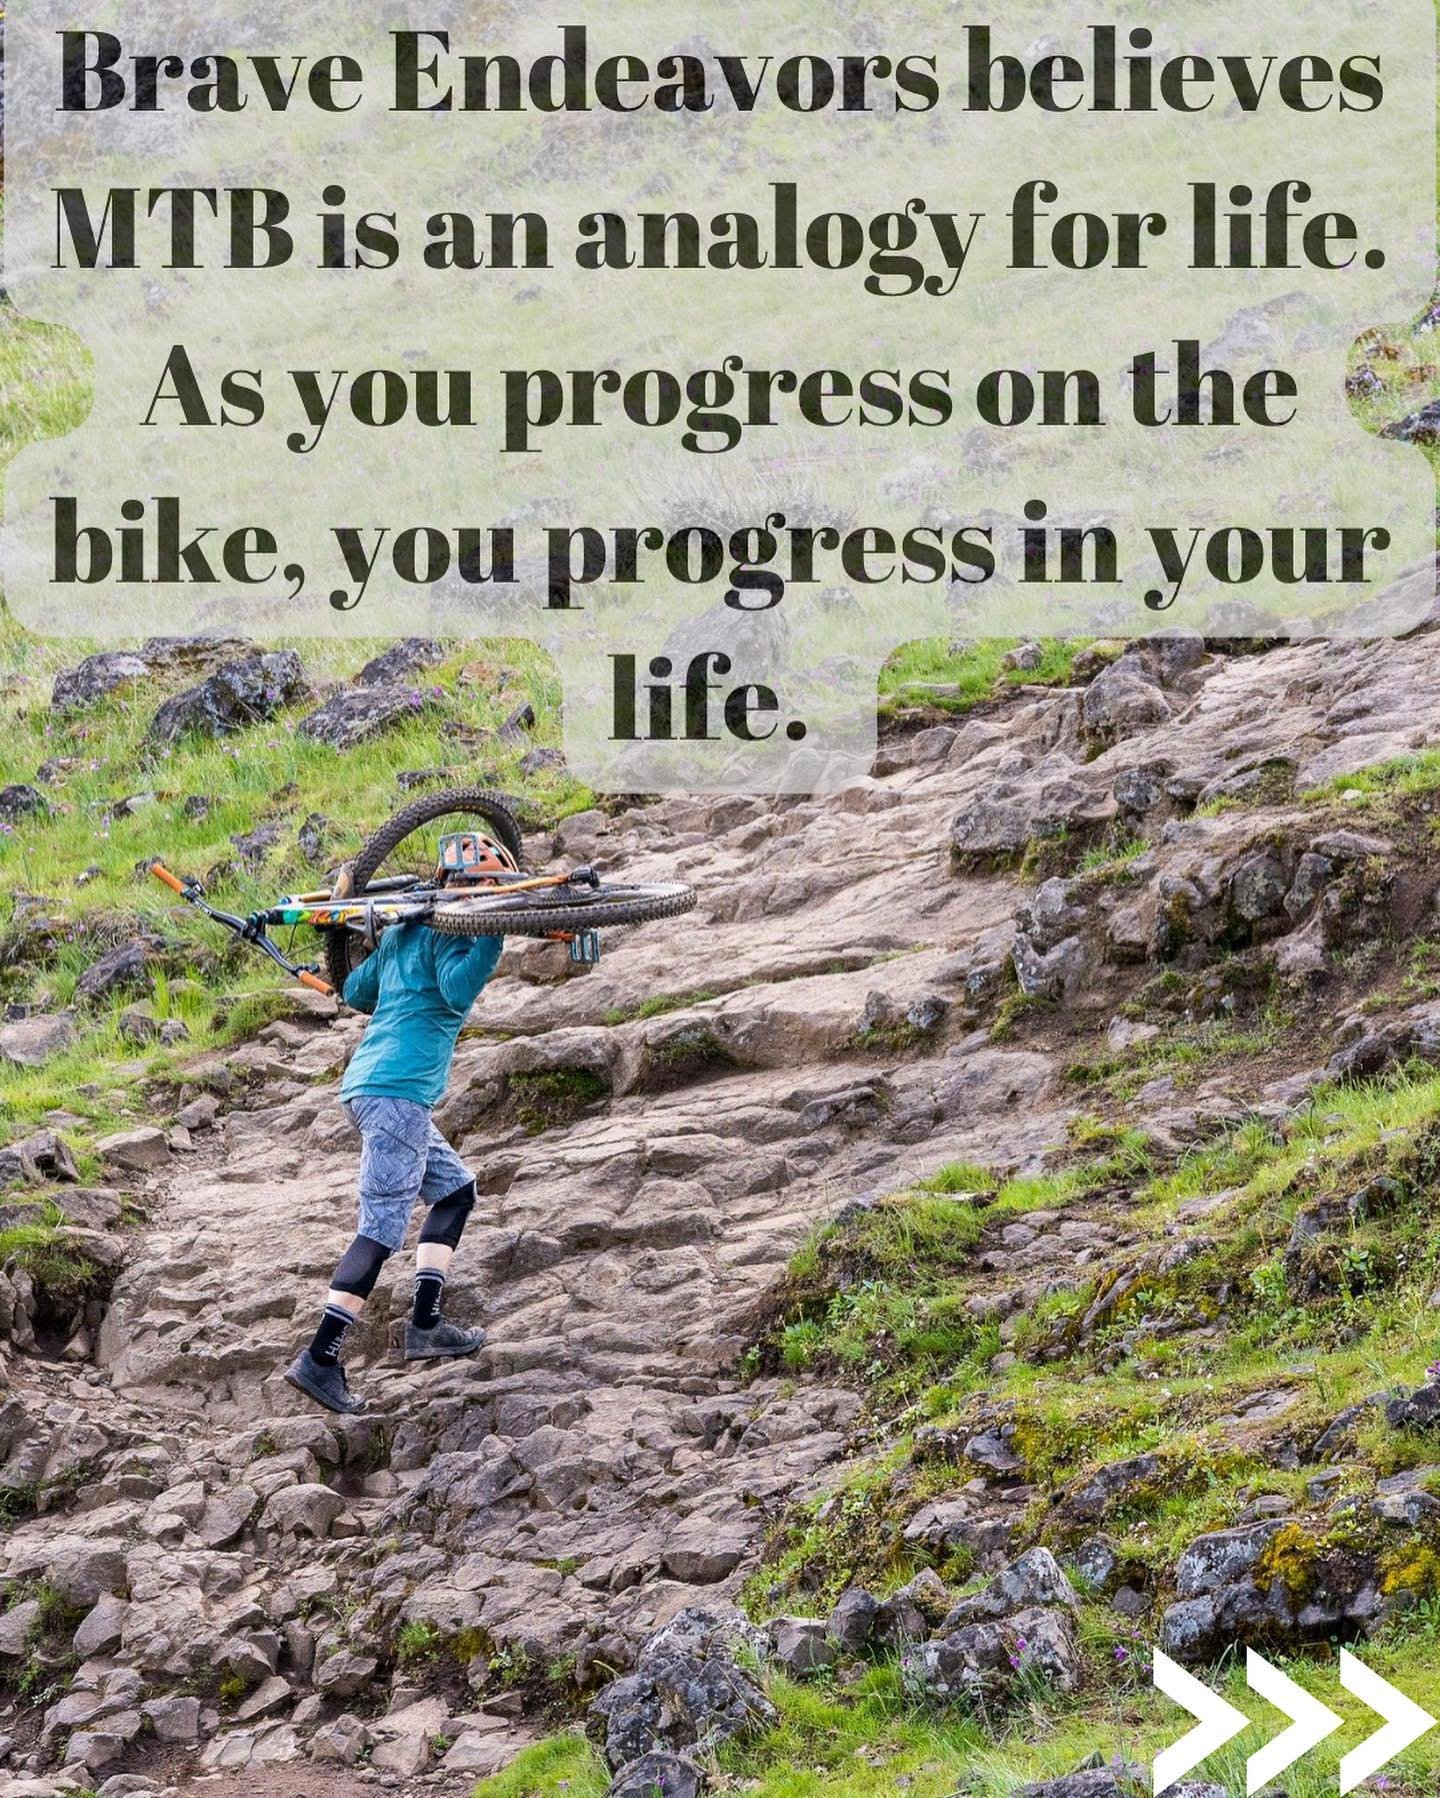 What do you believe?

Brave Endeavors believes mountain biking is an analogy for life. 

As we progress on the bike, we progress in our lives.

Our skills clinics and kid programs directly reflect this ethos.

We don&rsquo;t just talk the talk, we ri